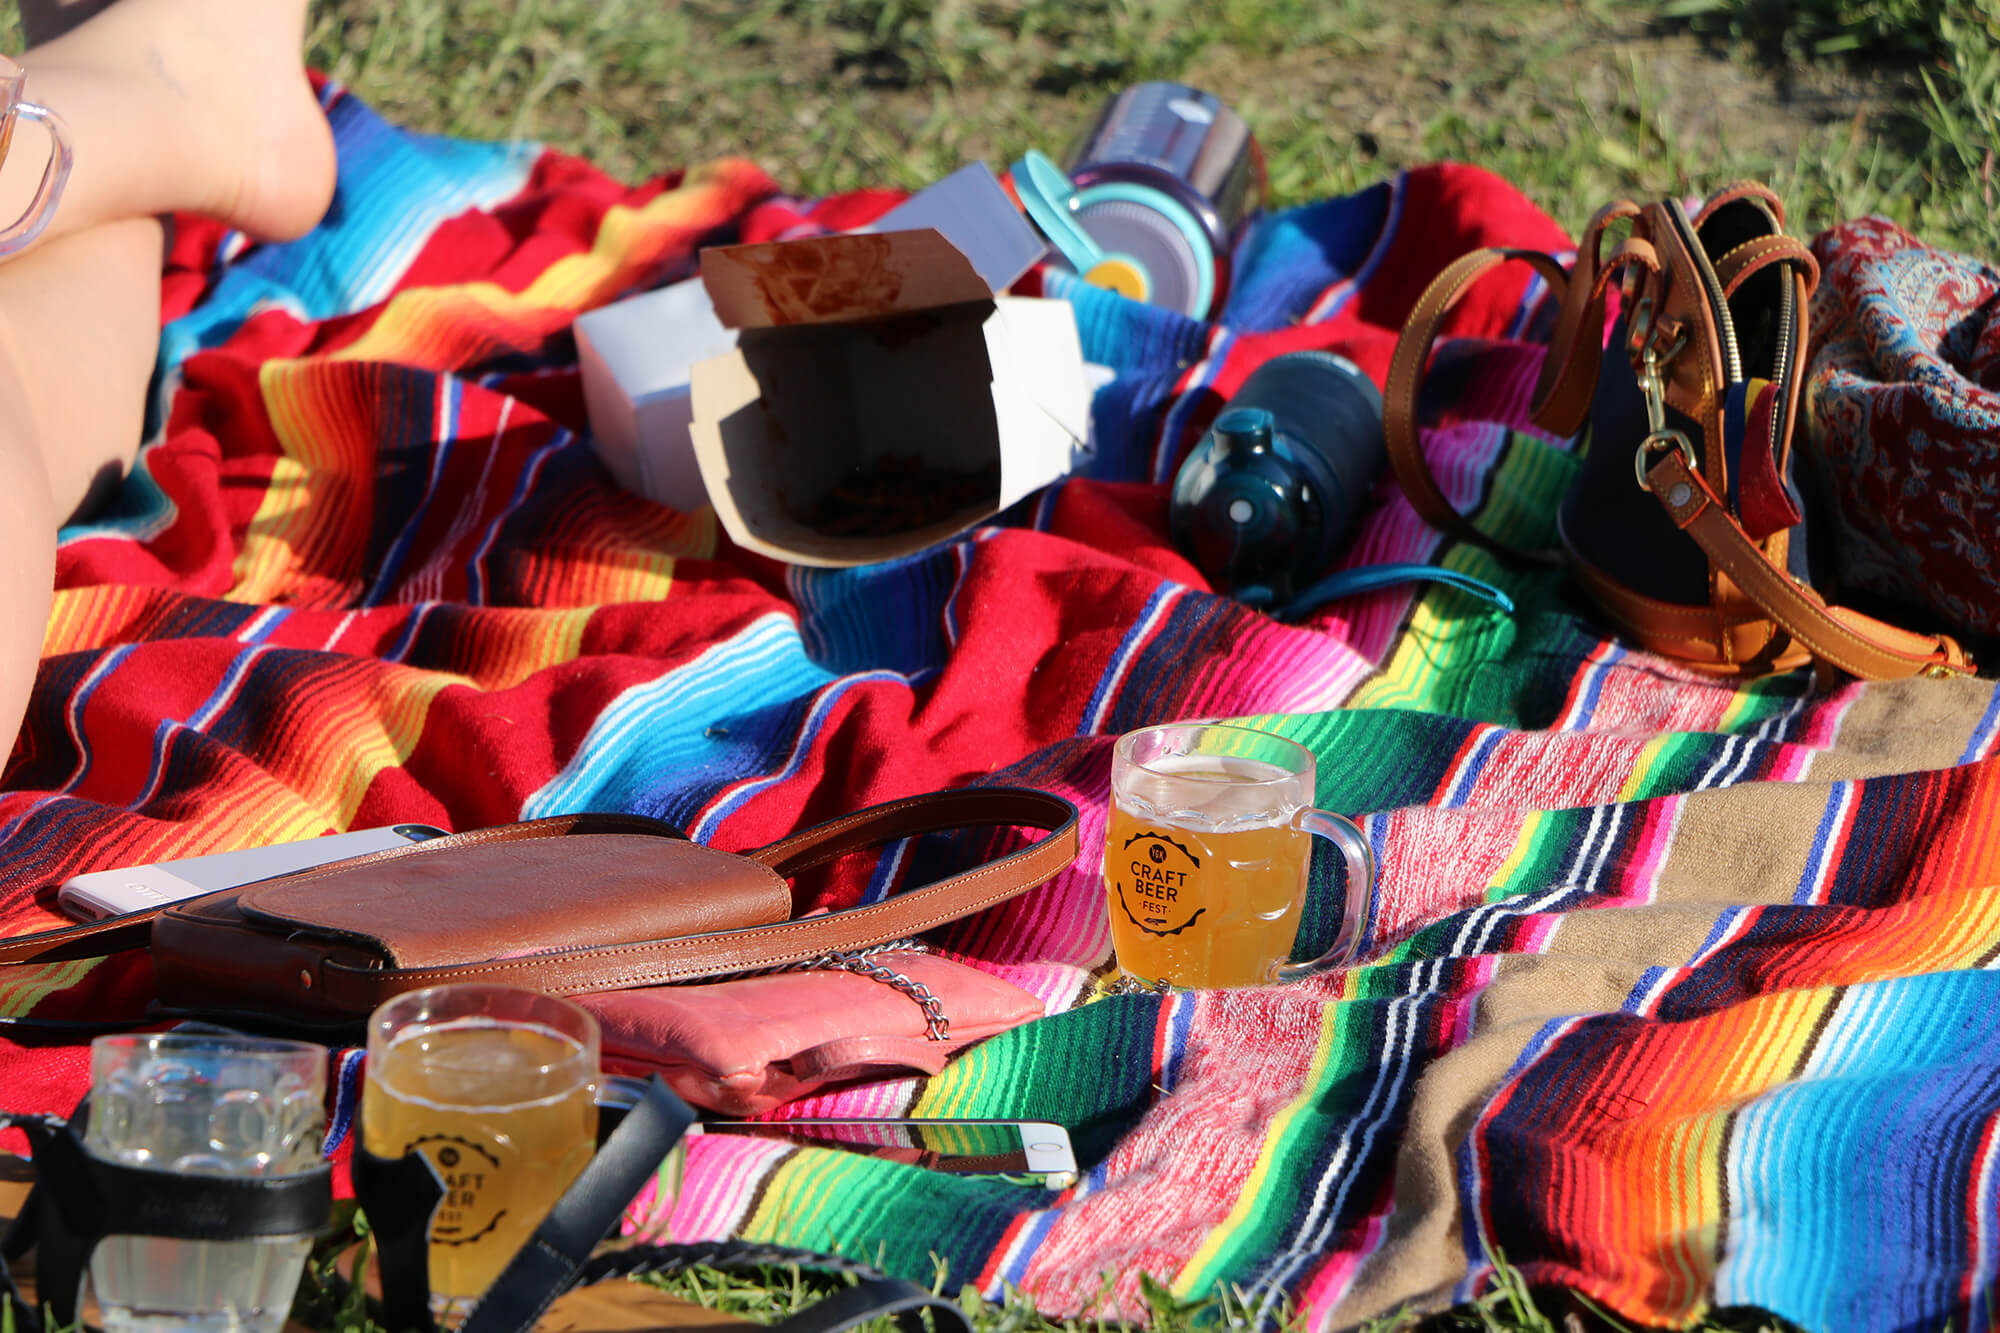 Colourful blanket on grass with mug filled beer with purse and personal belongings